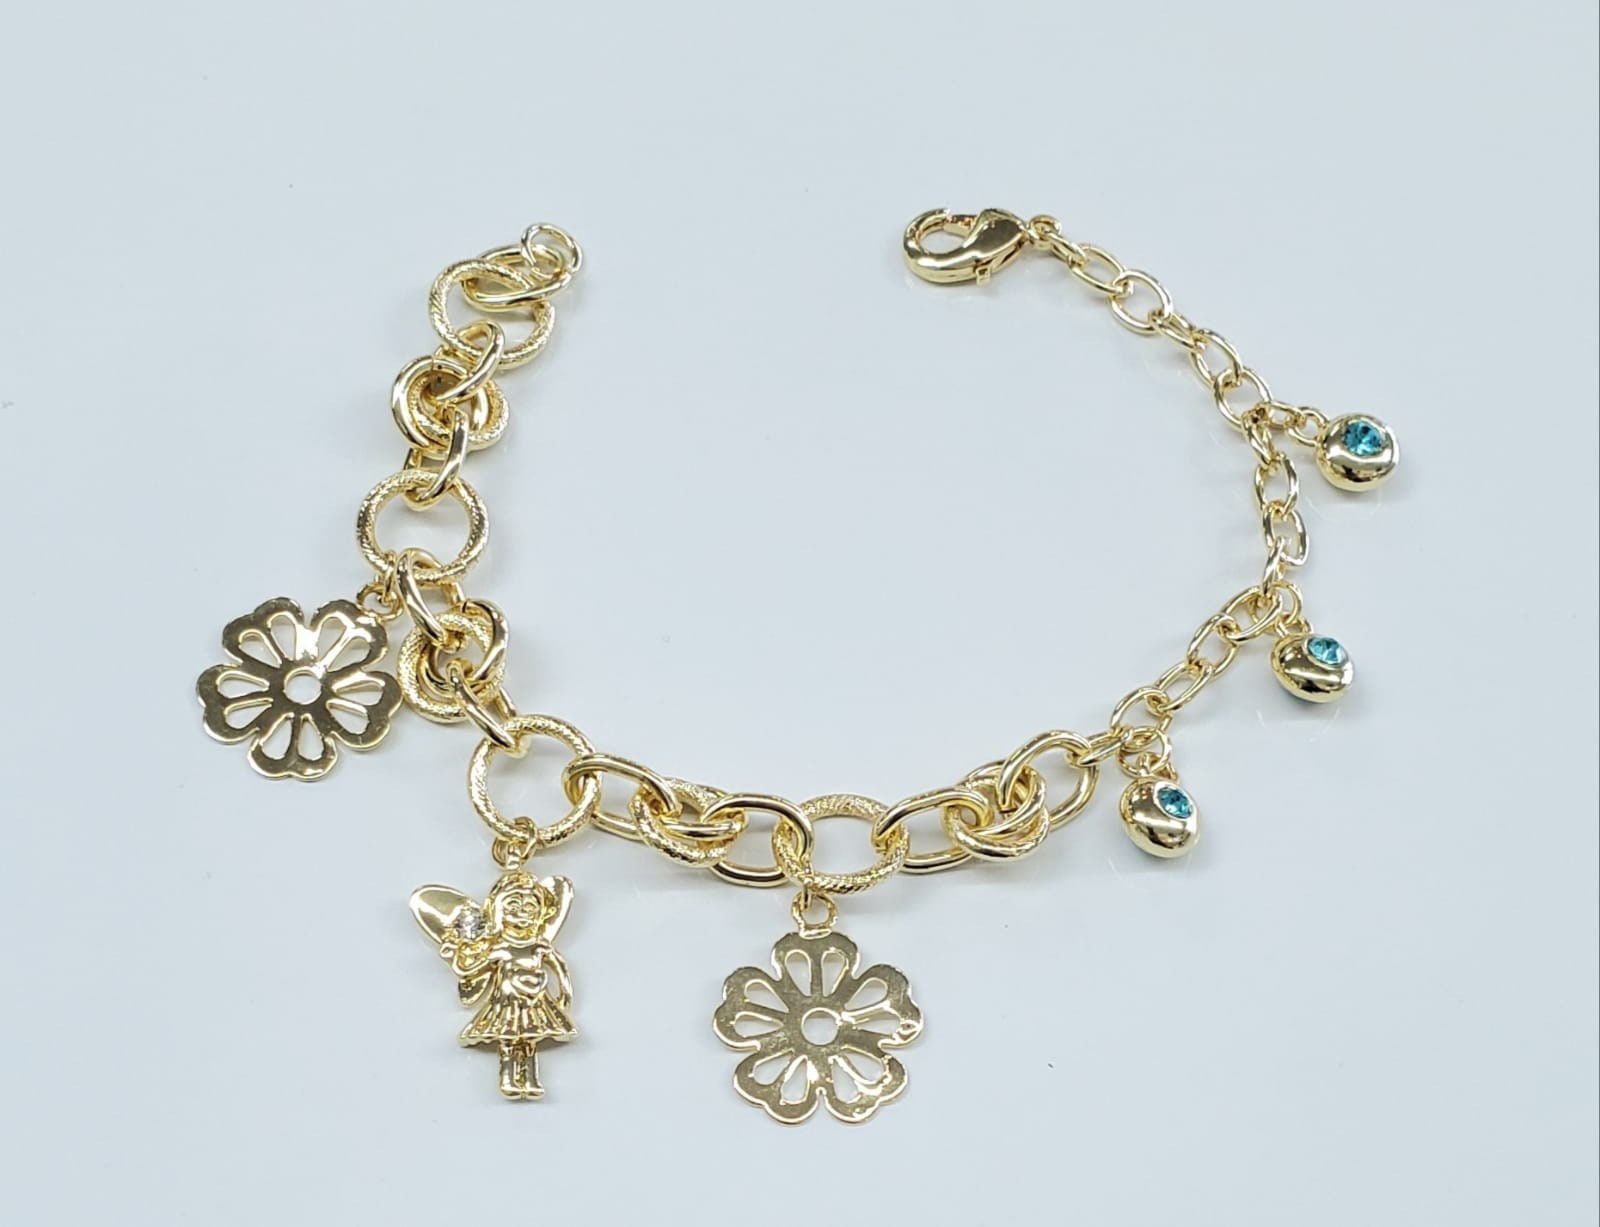 Butterfly Bracelet with Hanging Charm – Theglamsutra